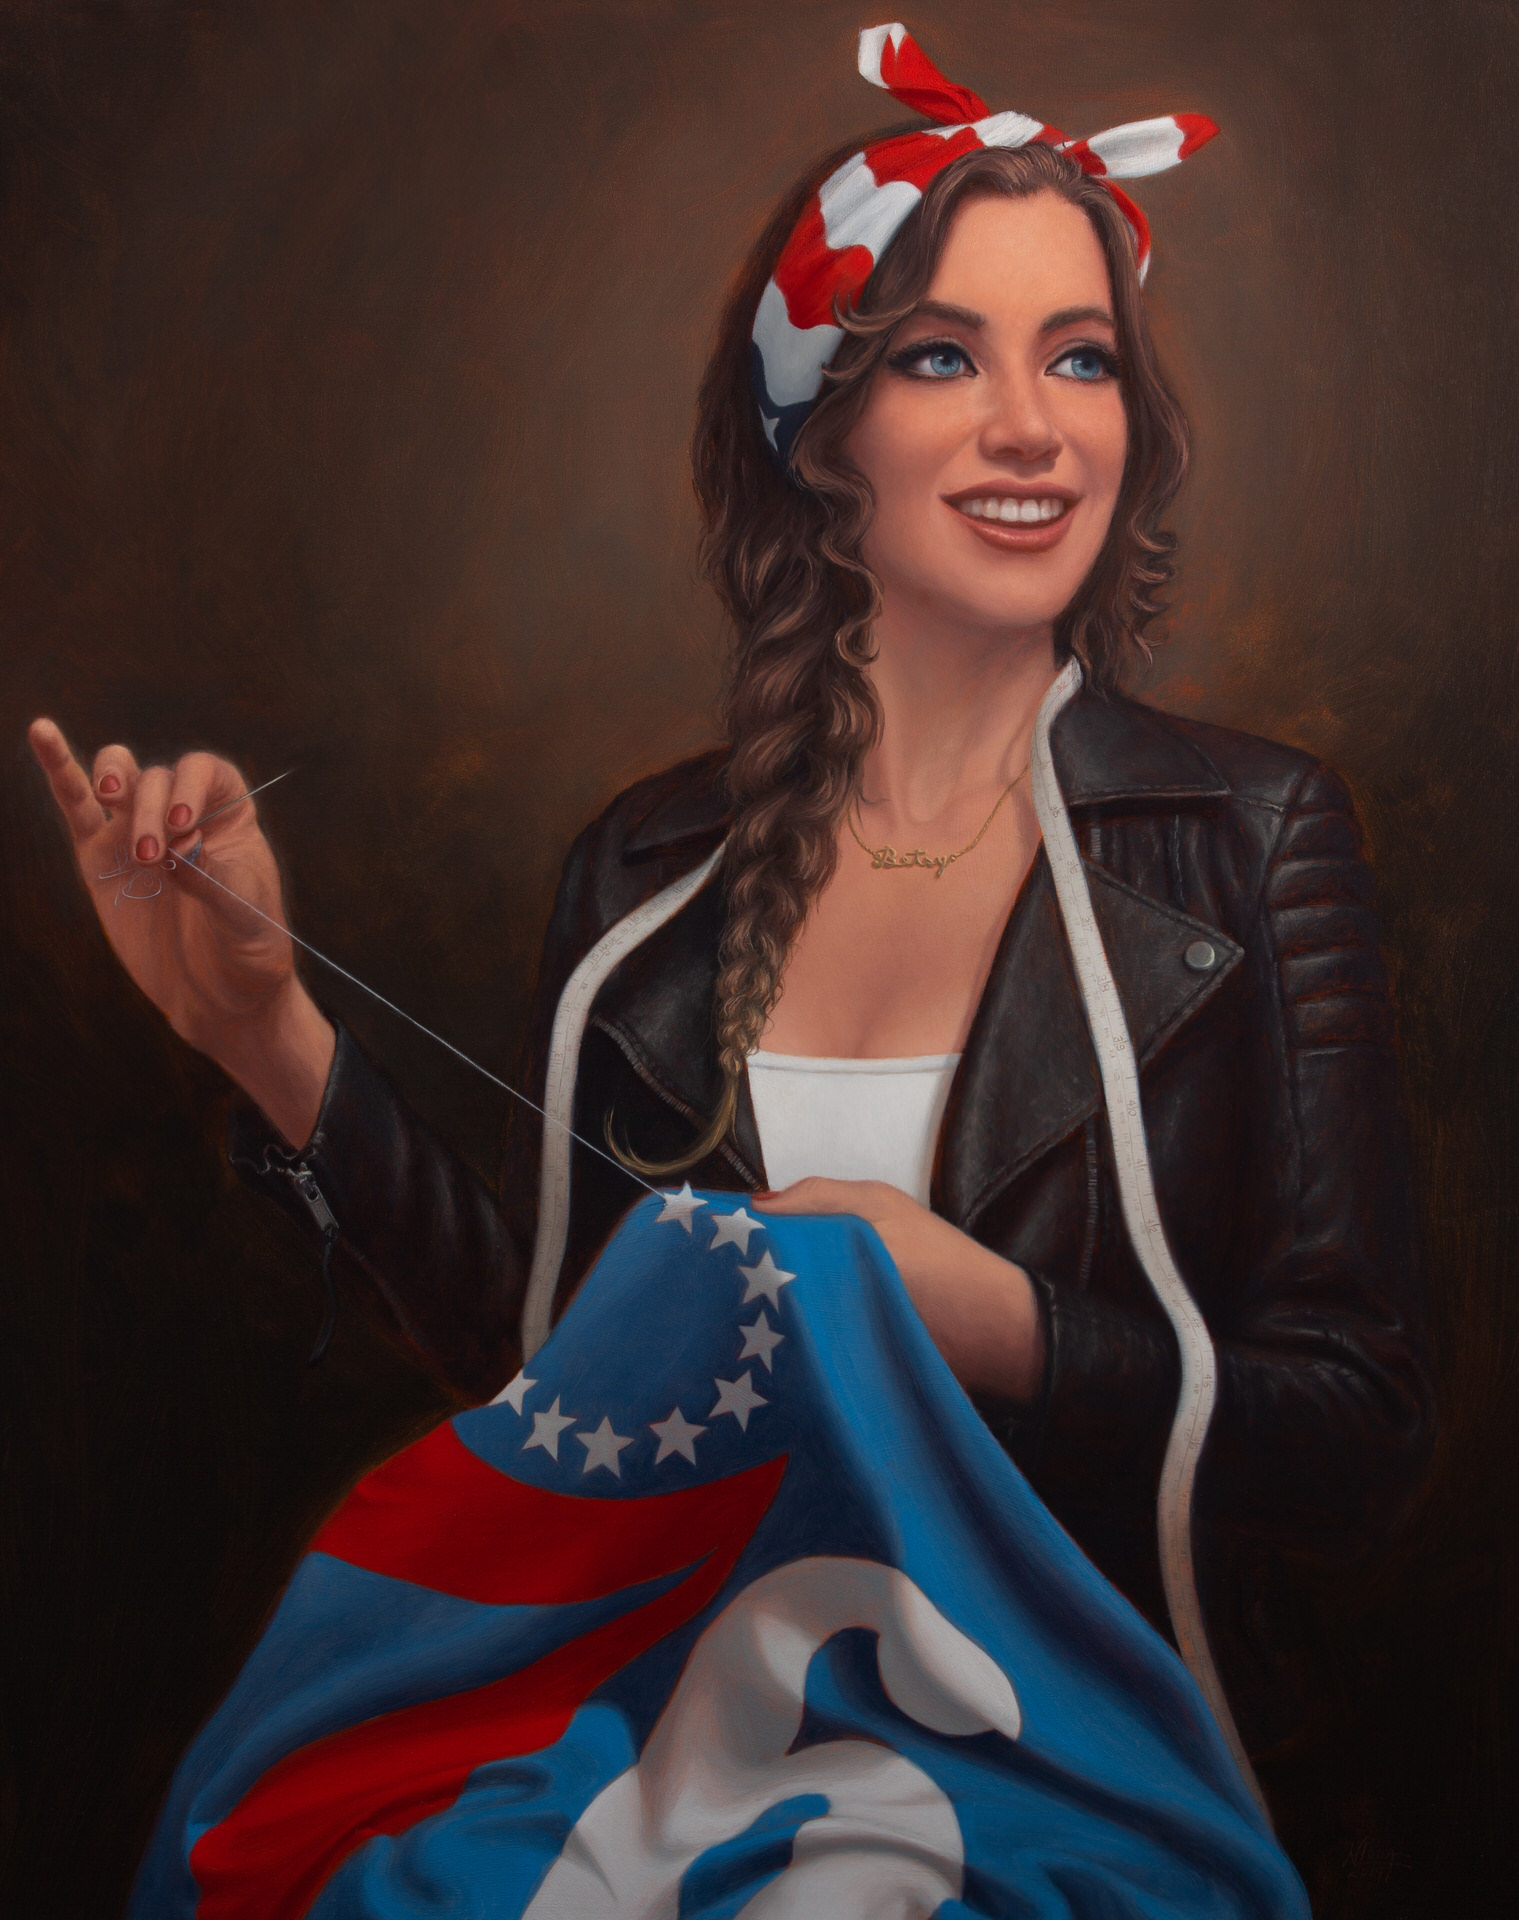 Betsy Ross by Ann Weil